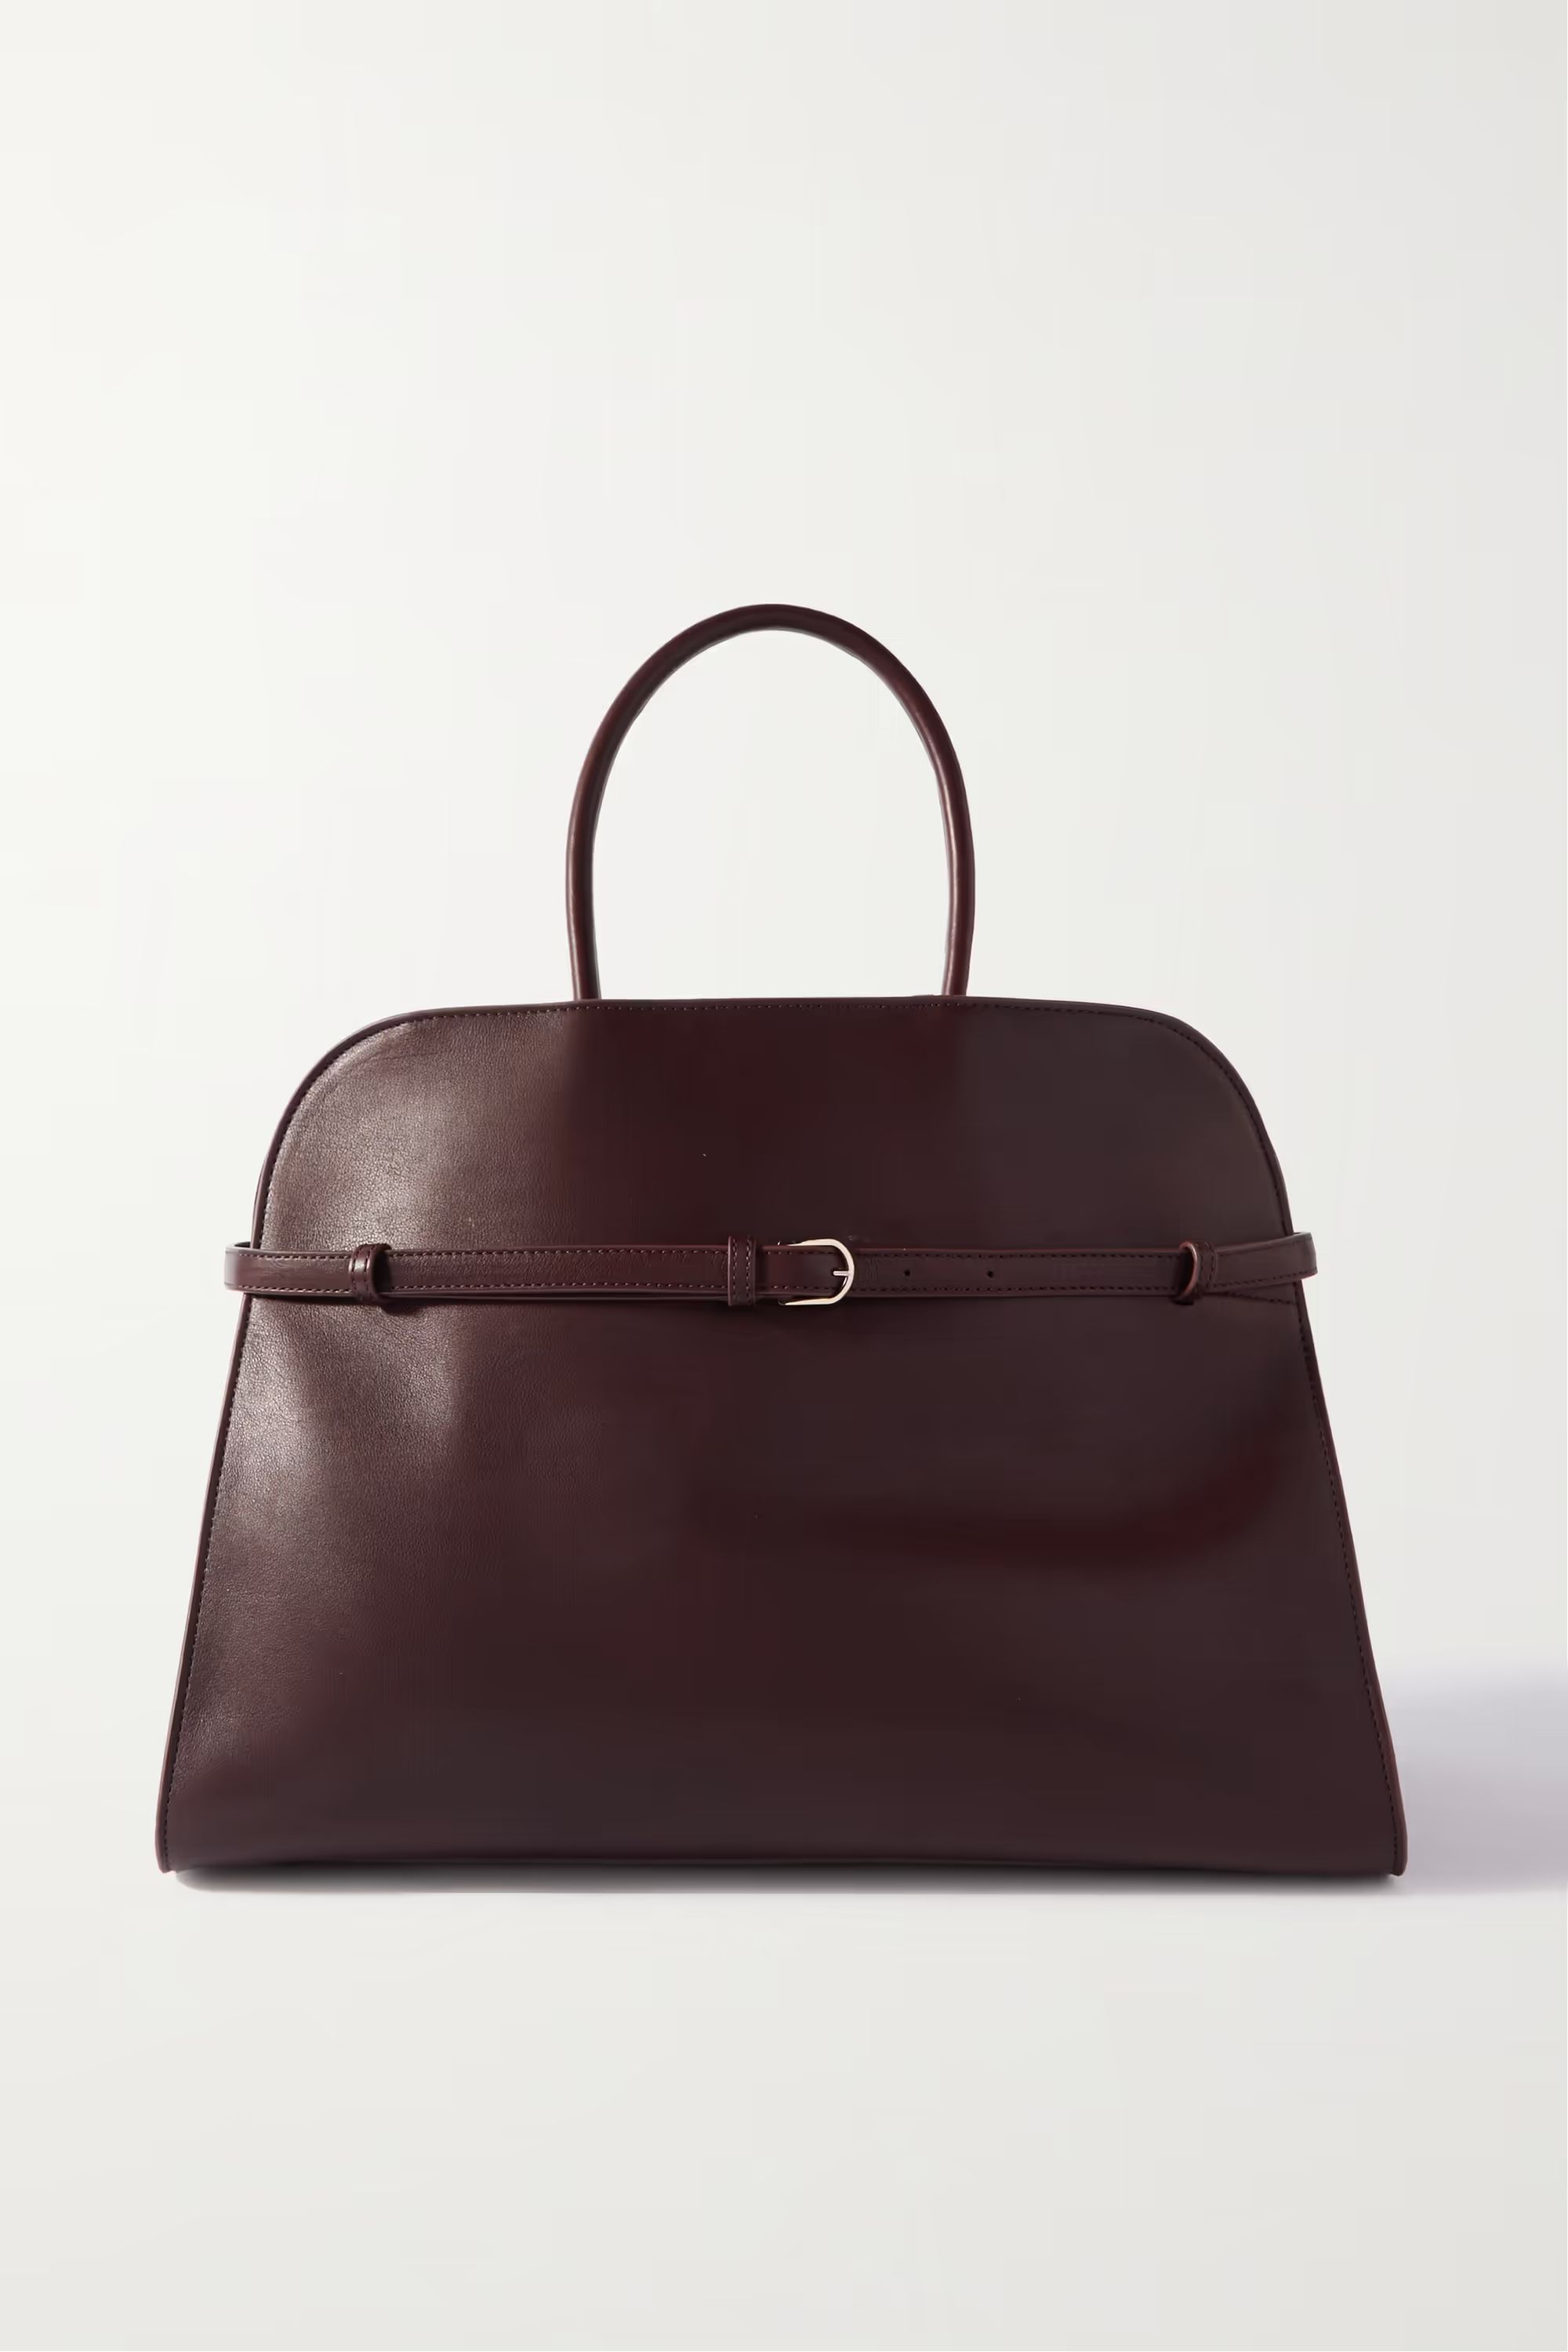 Margaux 15 buckled leather tote | NET-A-PORTER (US)